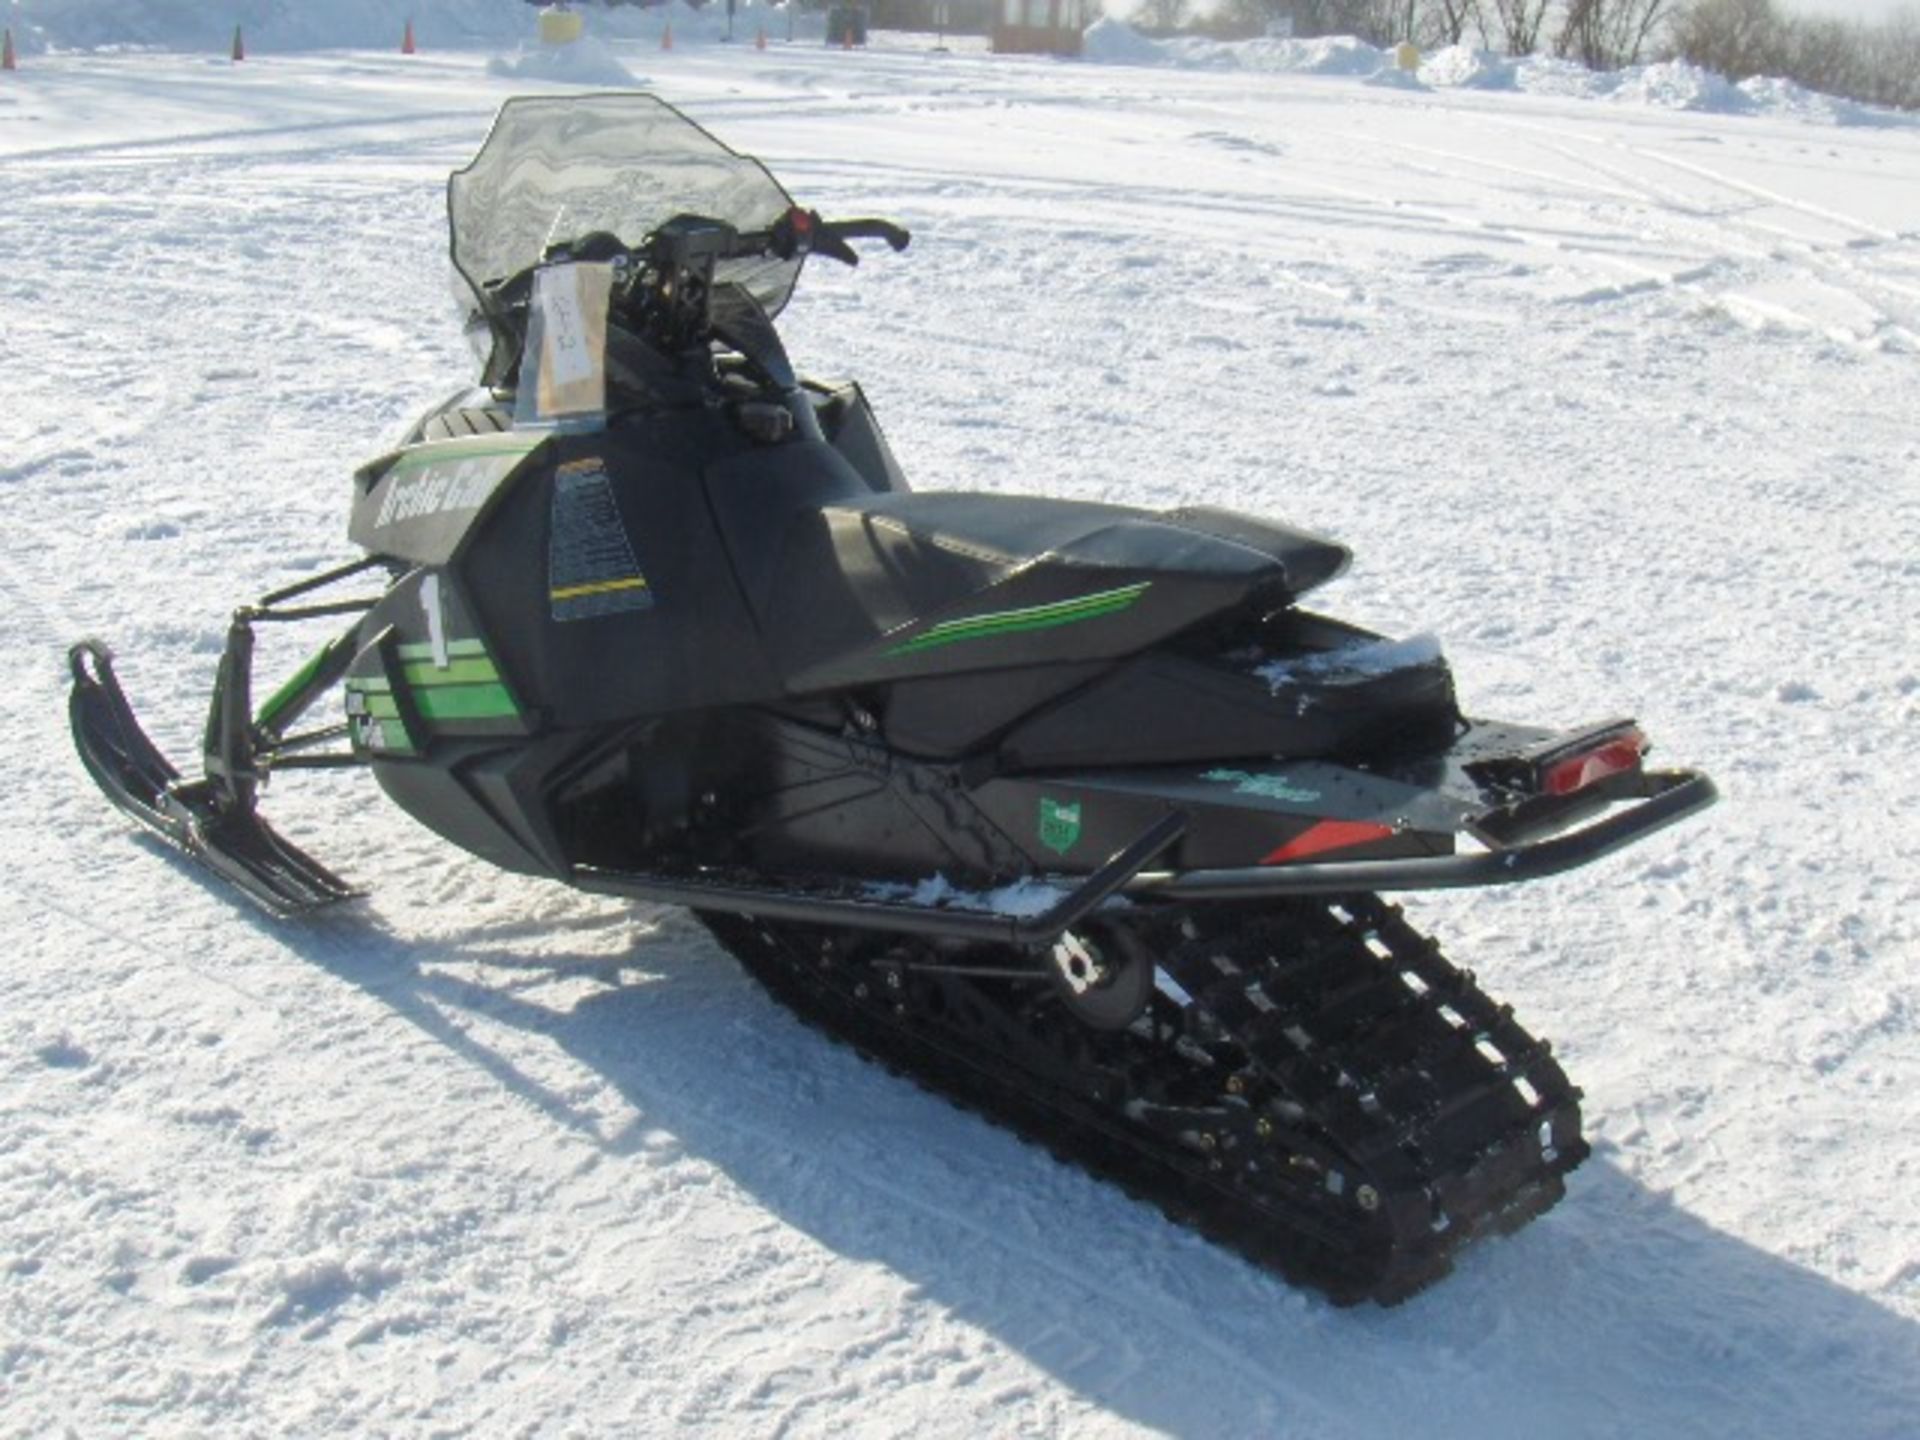 2012 ARCTIC CAT F 1100  4UF12SNW9CT116364 snowmobile, owner started at time of auction check in, - Image 4 of 4